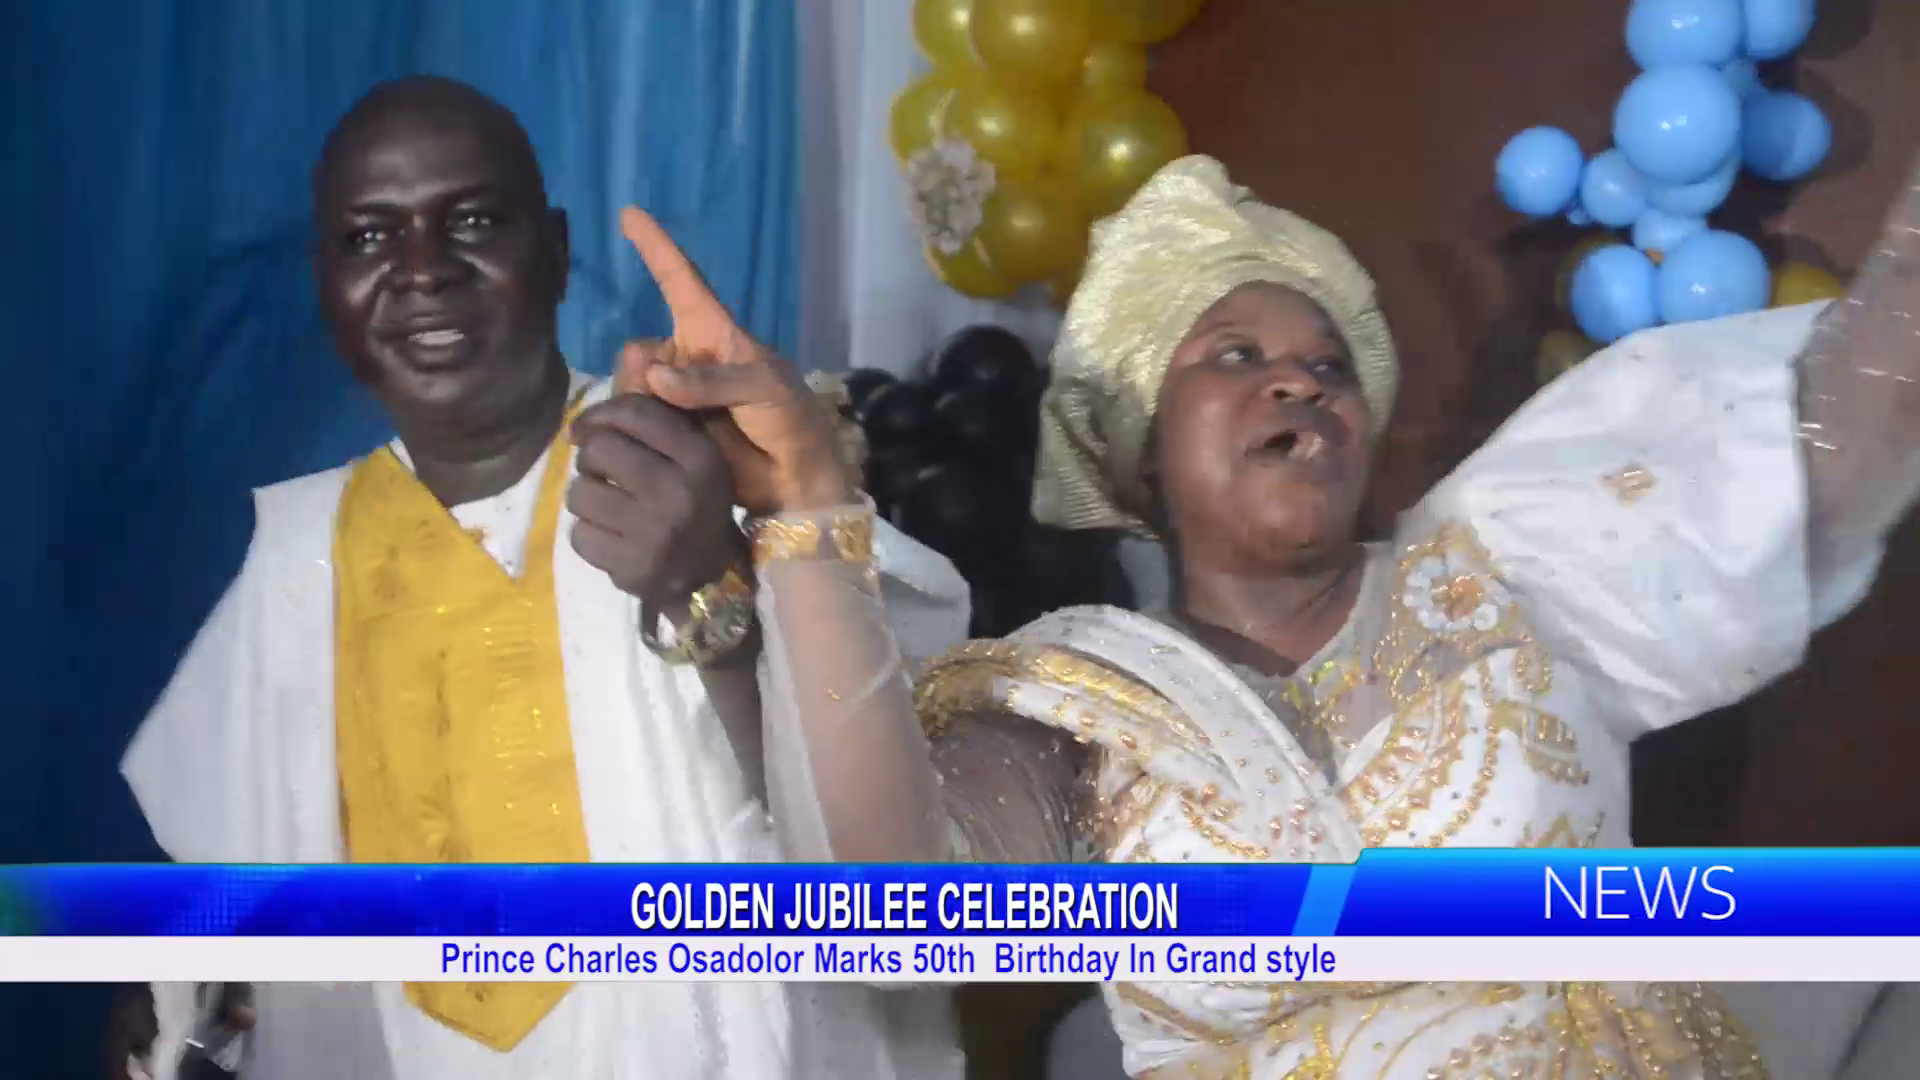 Prince Charles Osadolor Marks 50th Birthday In Grand style